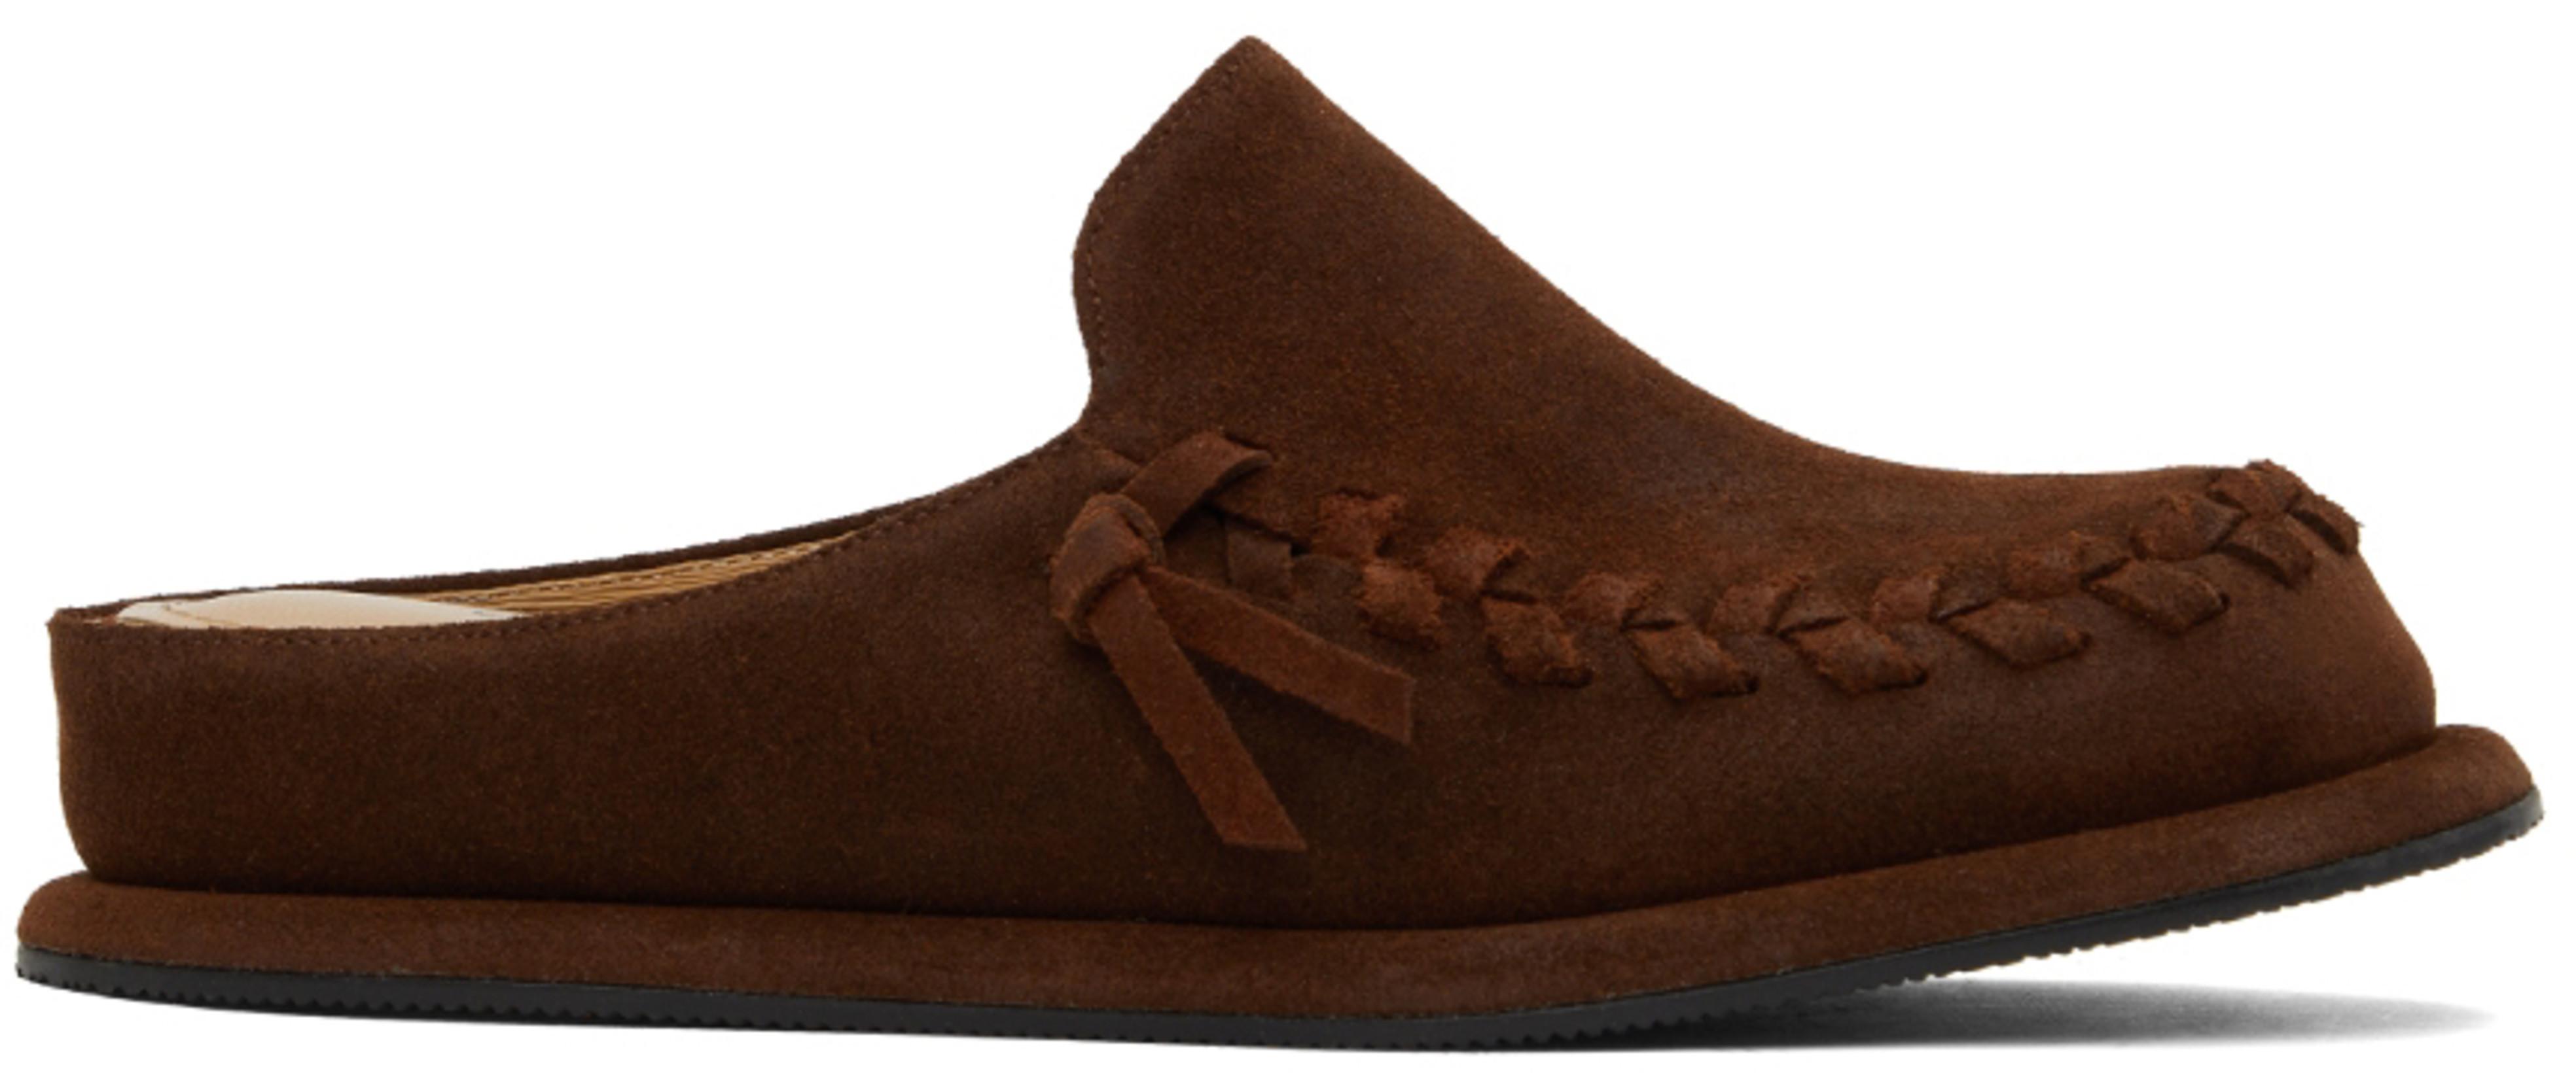 SSENSE Exclusive Brown Freed Loafers by COMME SE-A